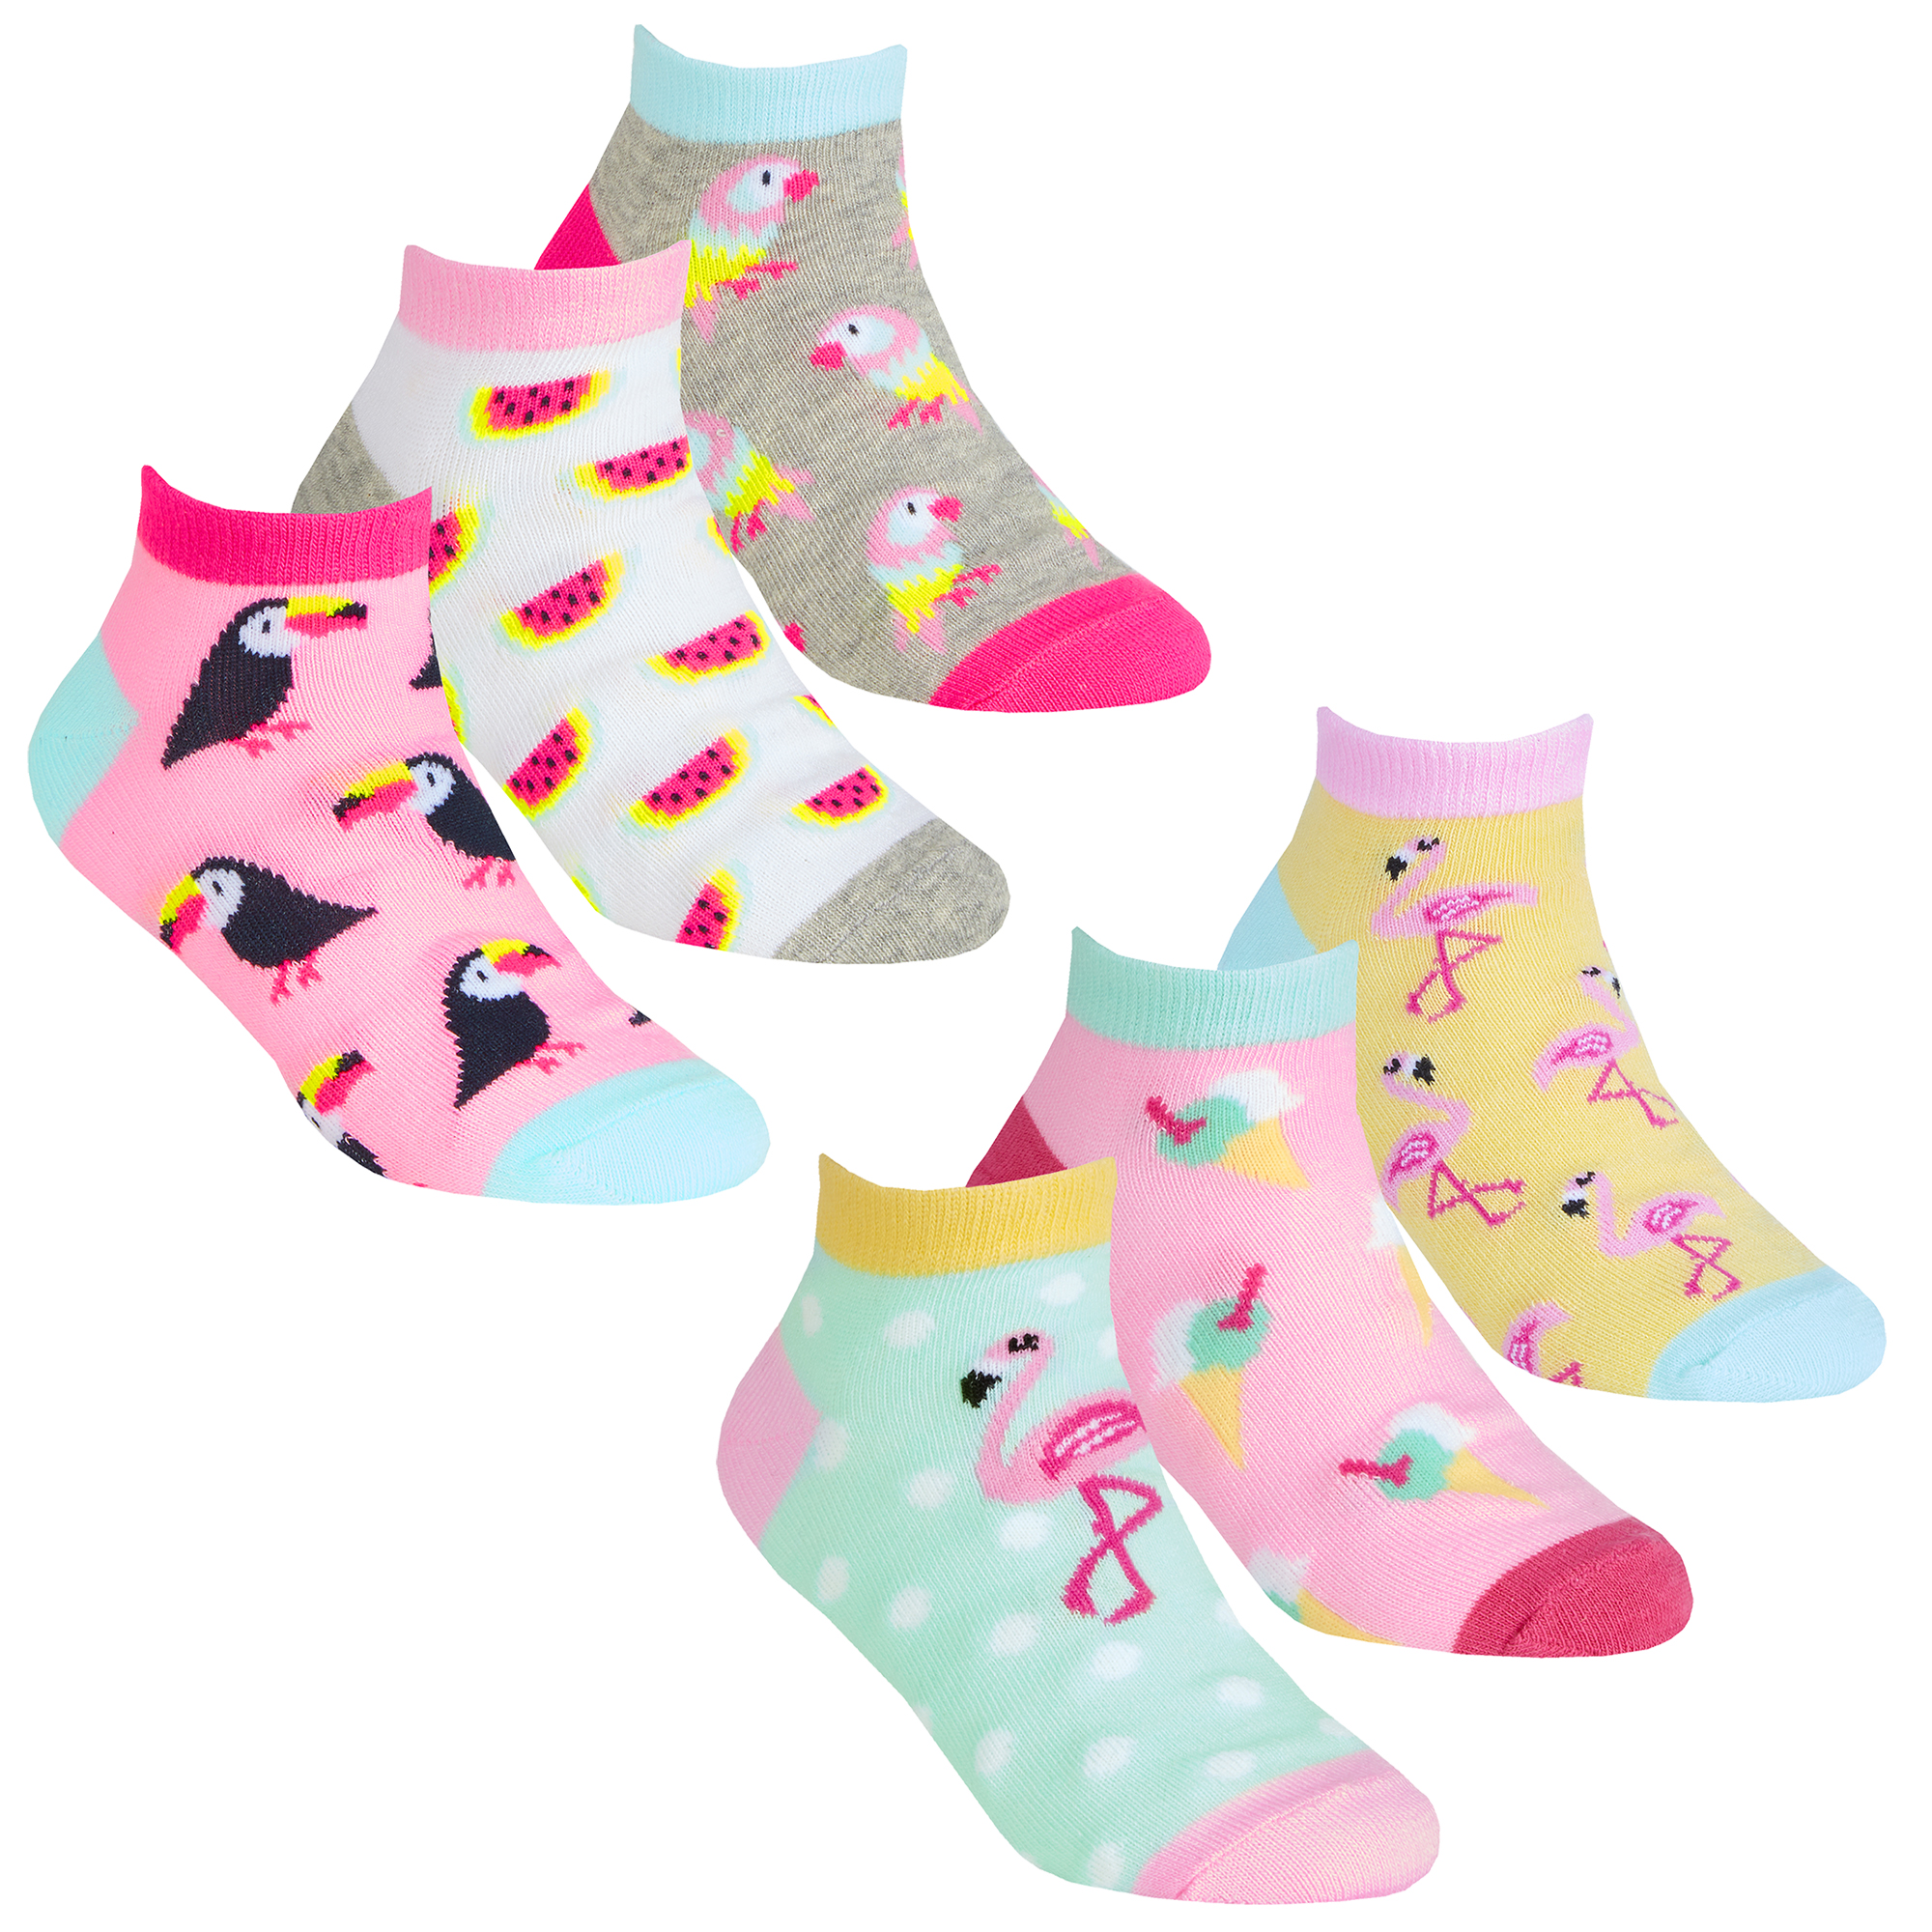 3 or 6 Pair Trainer Liner for School Cottonique Girls Frilly Lace Ankle Socks